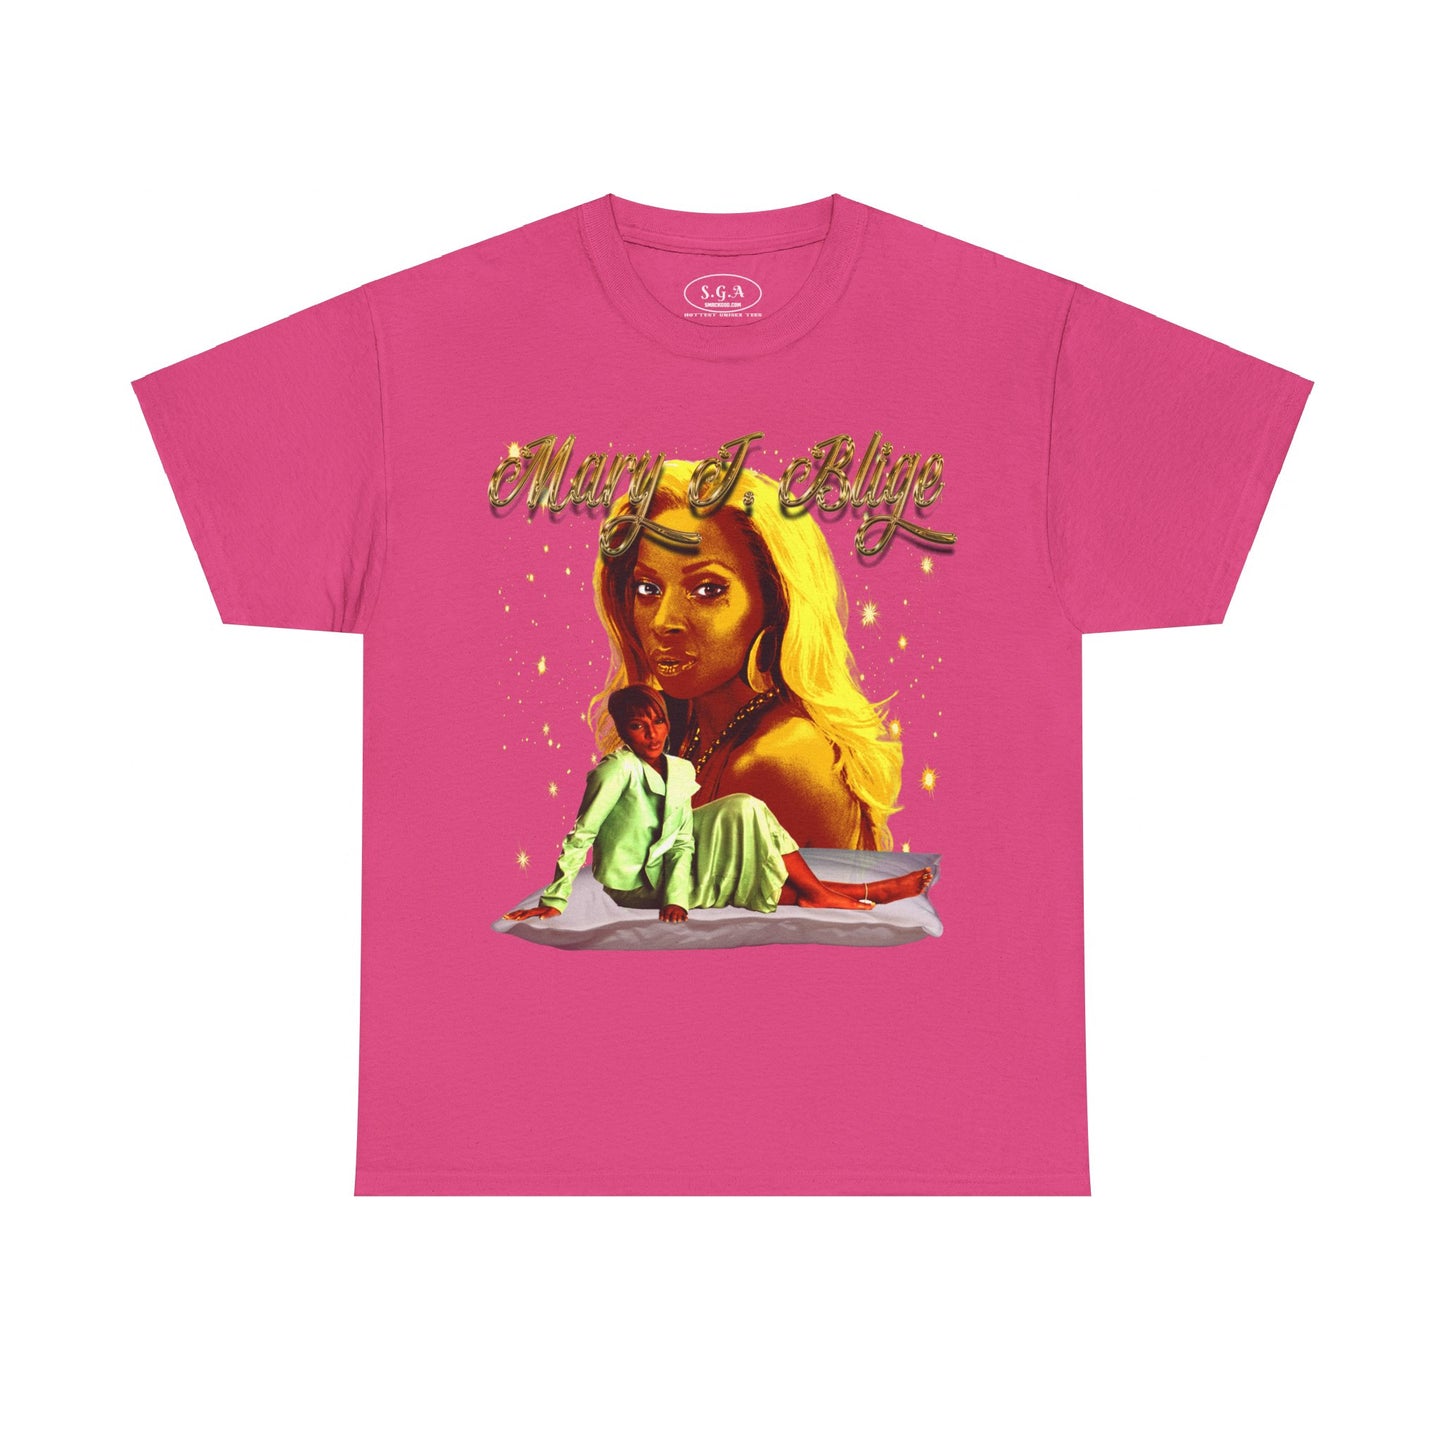 "Mary J. Blige T-Shirt featuring a stylish graphic design, available from Smack God Apparel."